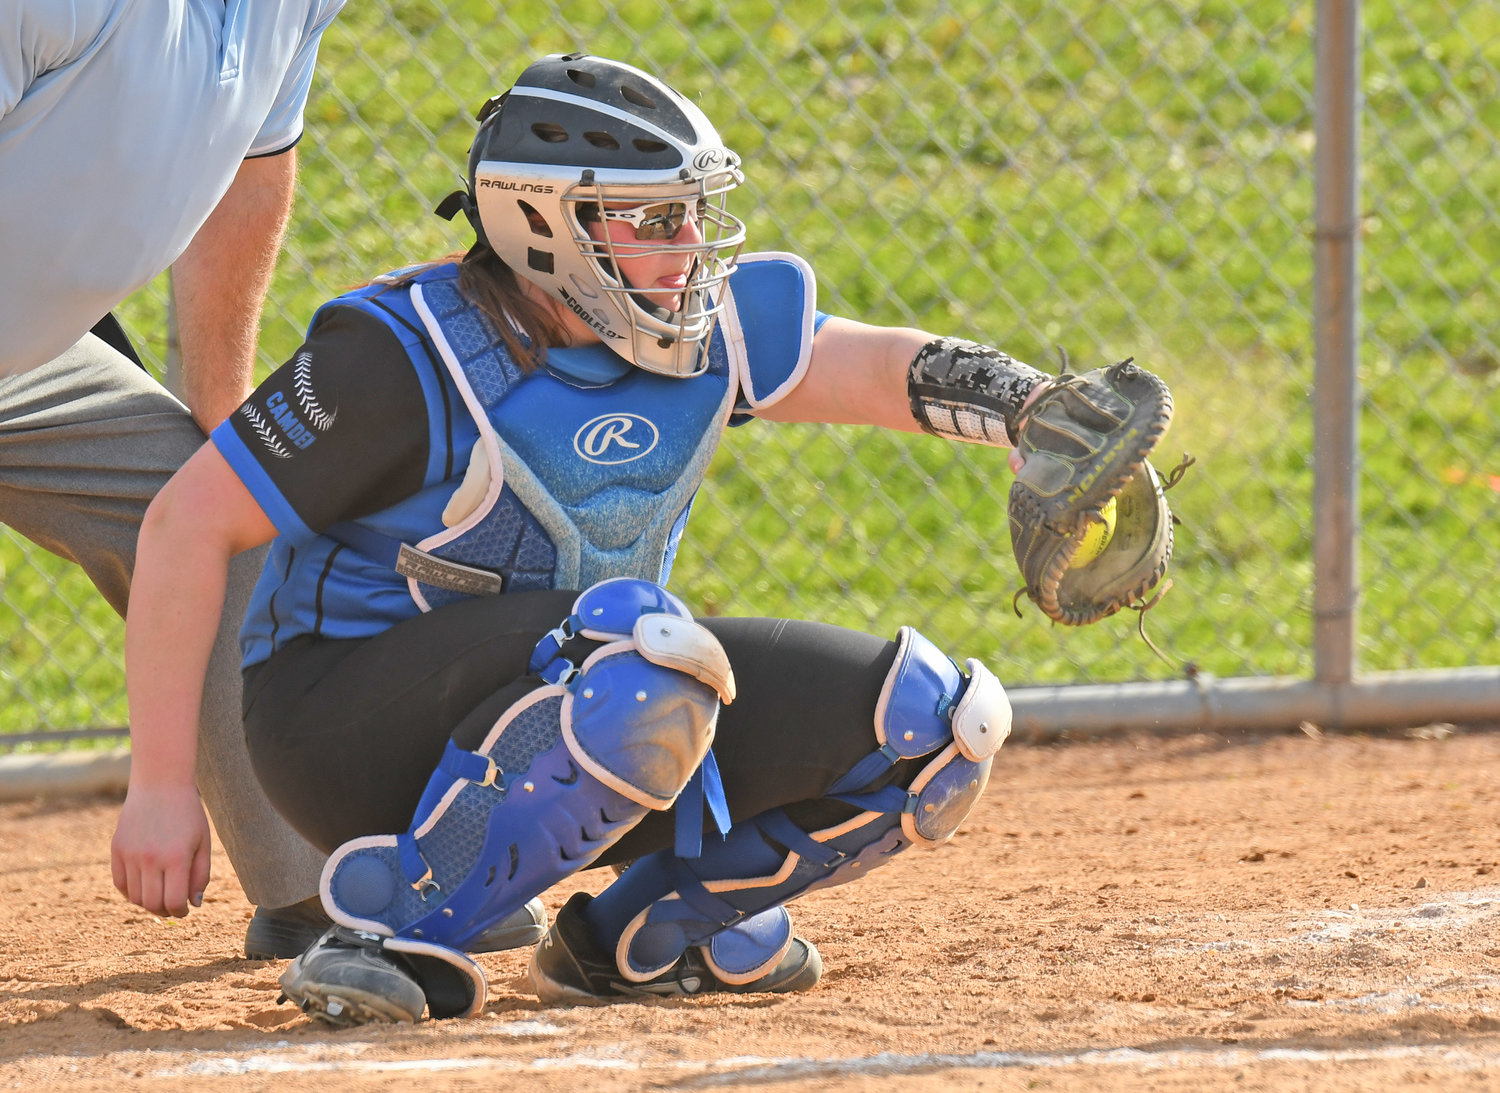 ON TARGET — Camden catcher Kaitlyn Findlay frames a pitch in action earlier this season. Findlay and the Blue Devils are off to a 7-0 start and she’s batting .500 in the middle of the lineup. Her 13 hits include three doubles, a triple and a homer. She’s driven in a dozen runs as well.